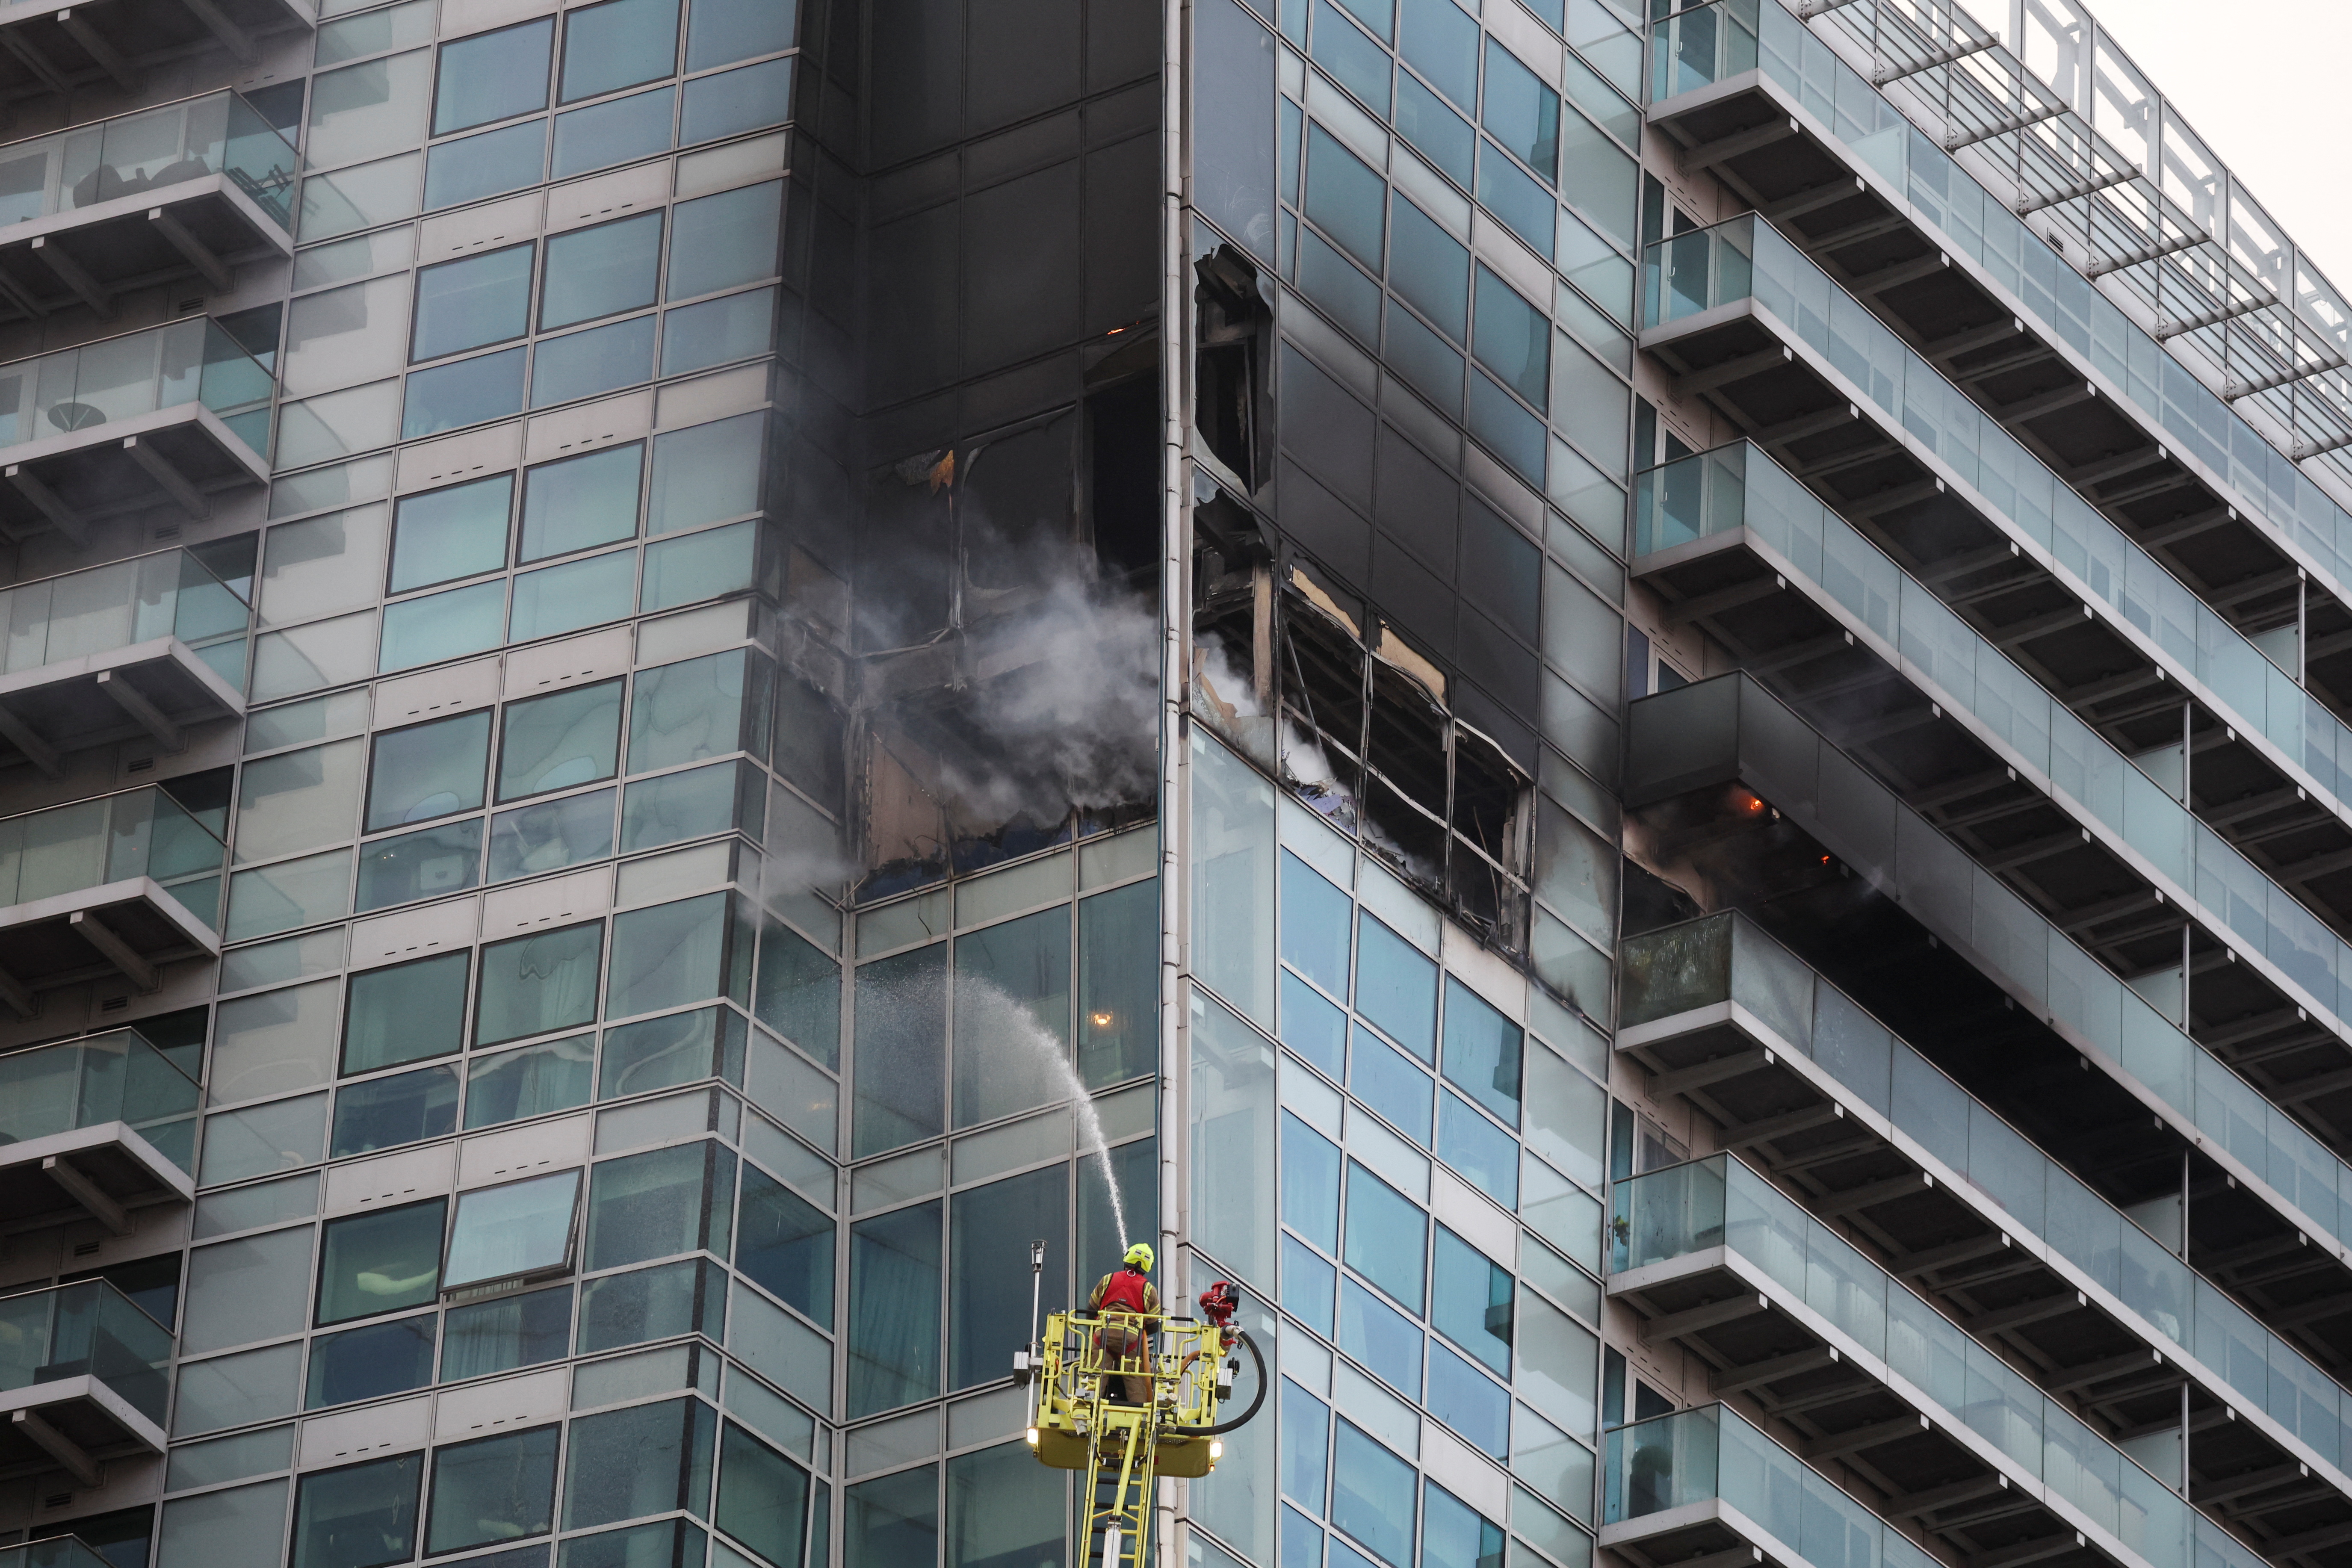 Firefighters extinguish a fire at a building in East London